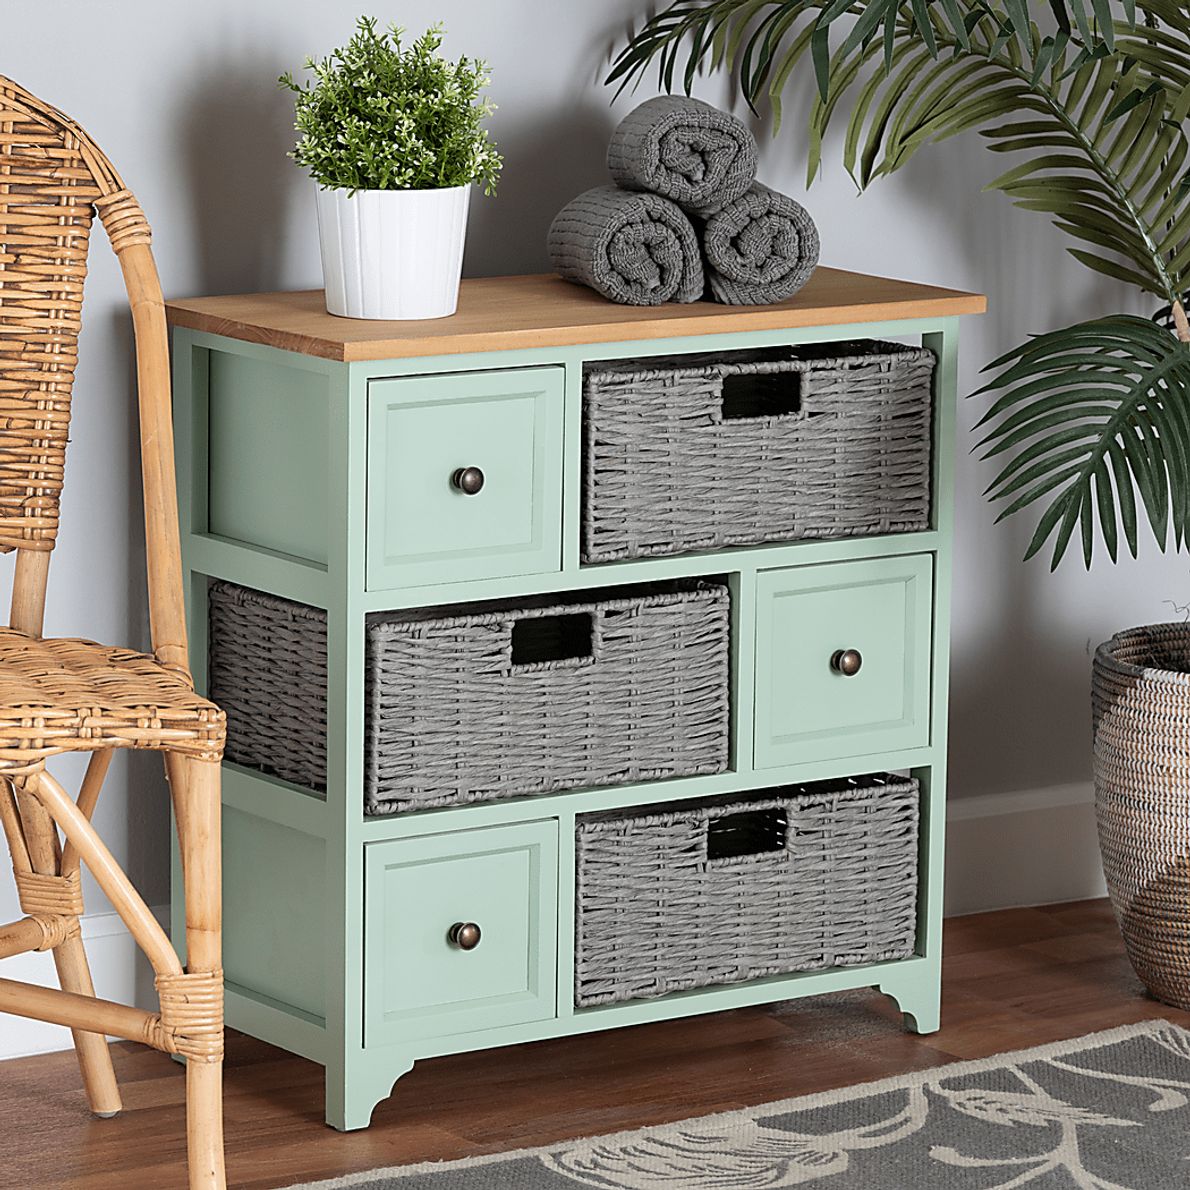 Enderby Mint Green Storage Cabinet